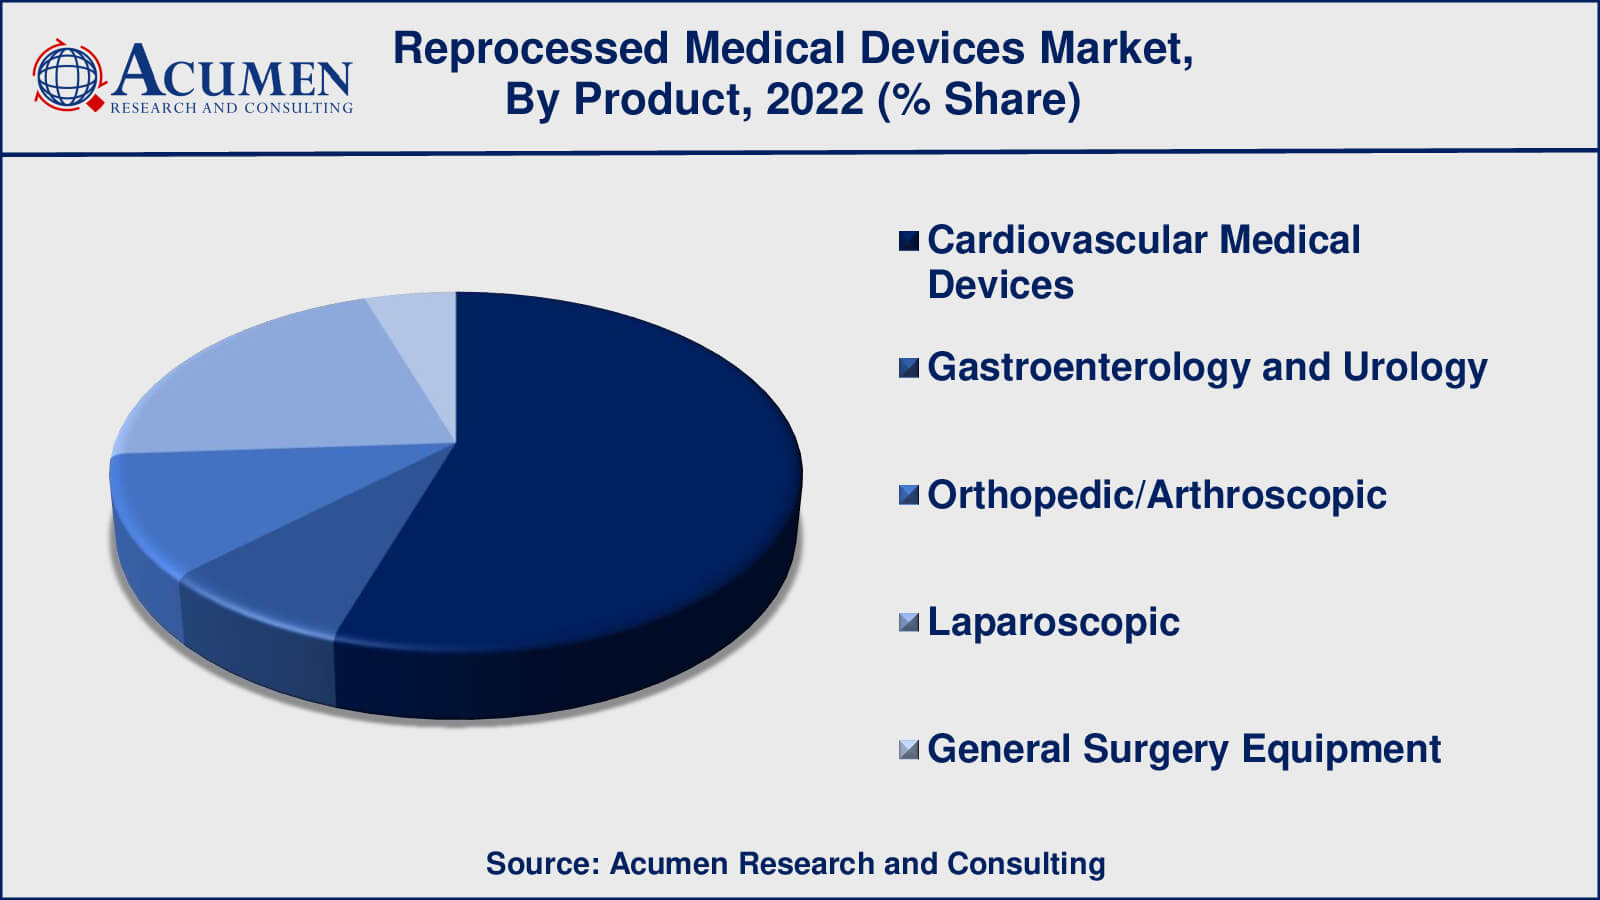 Reprocessed Medical Devices Market Drivers